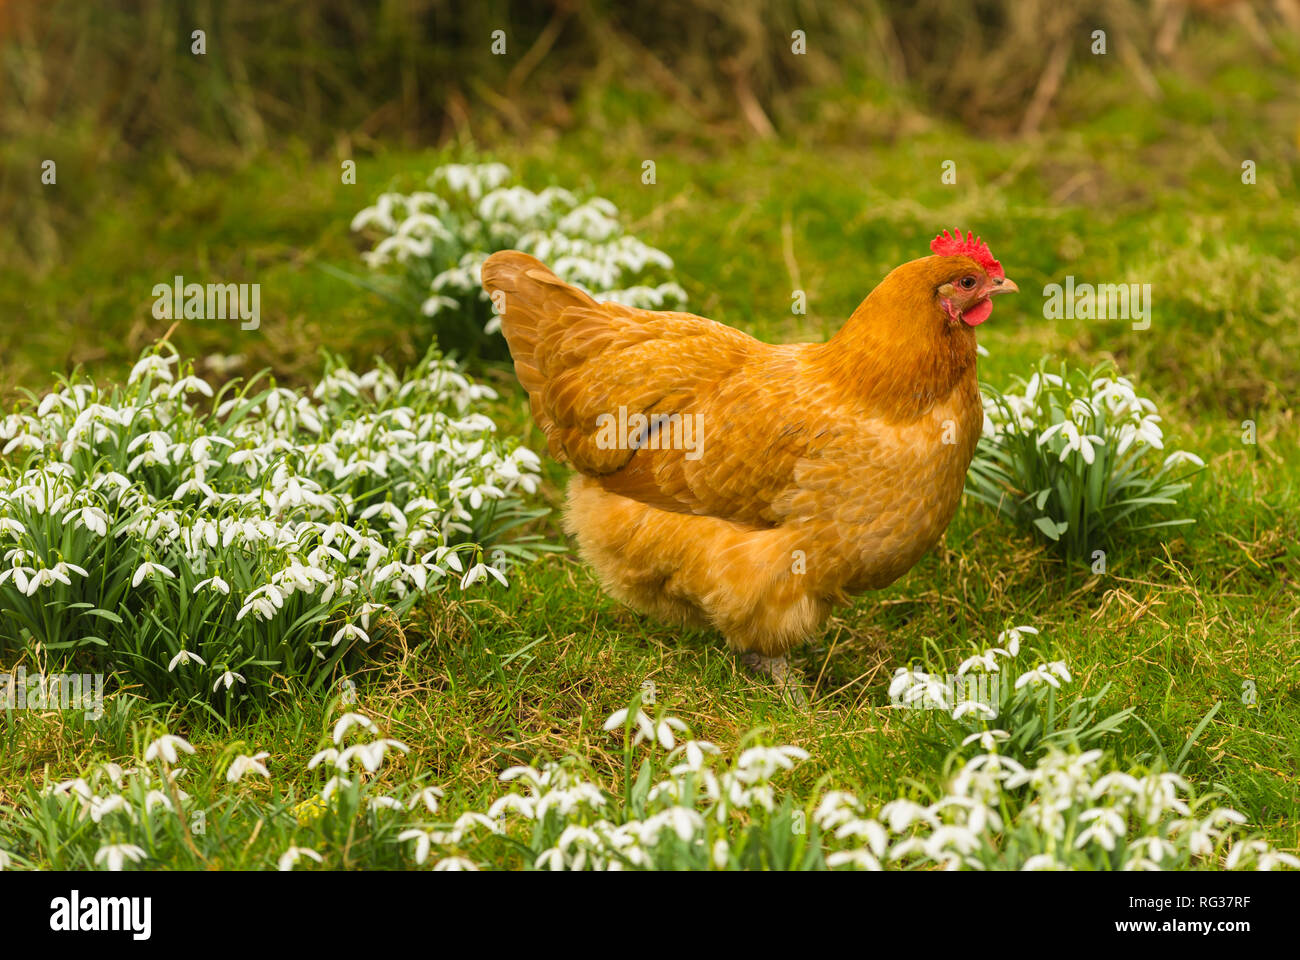 Buff Orpington chicken or hen in springtime with snowdrops. The hen has a bright red comb and is foraging in the garden amongst the snowdrops. Stock Photo